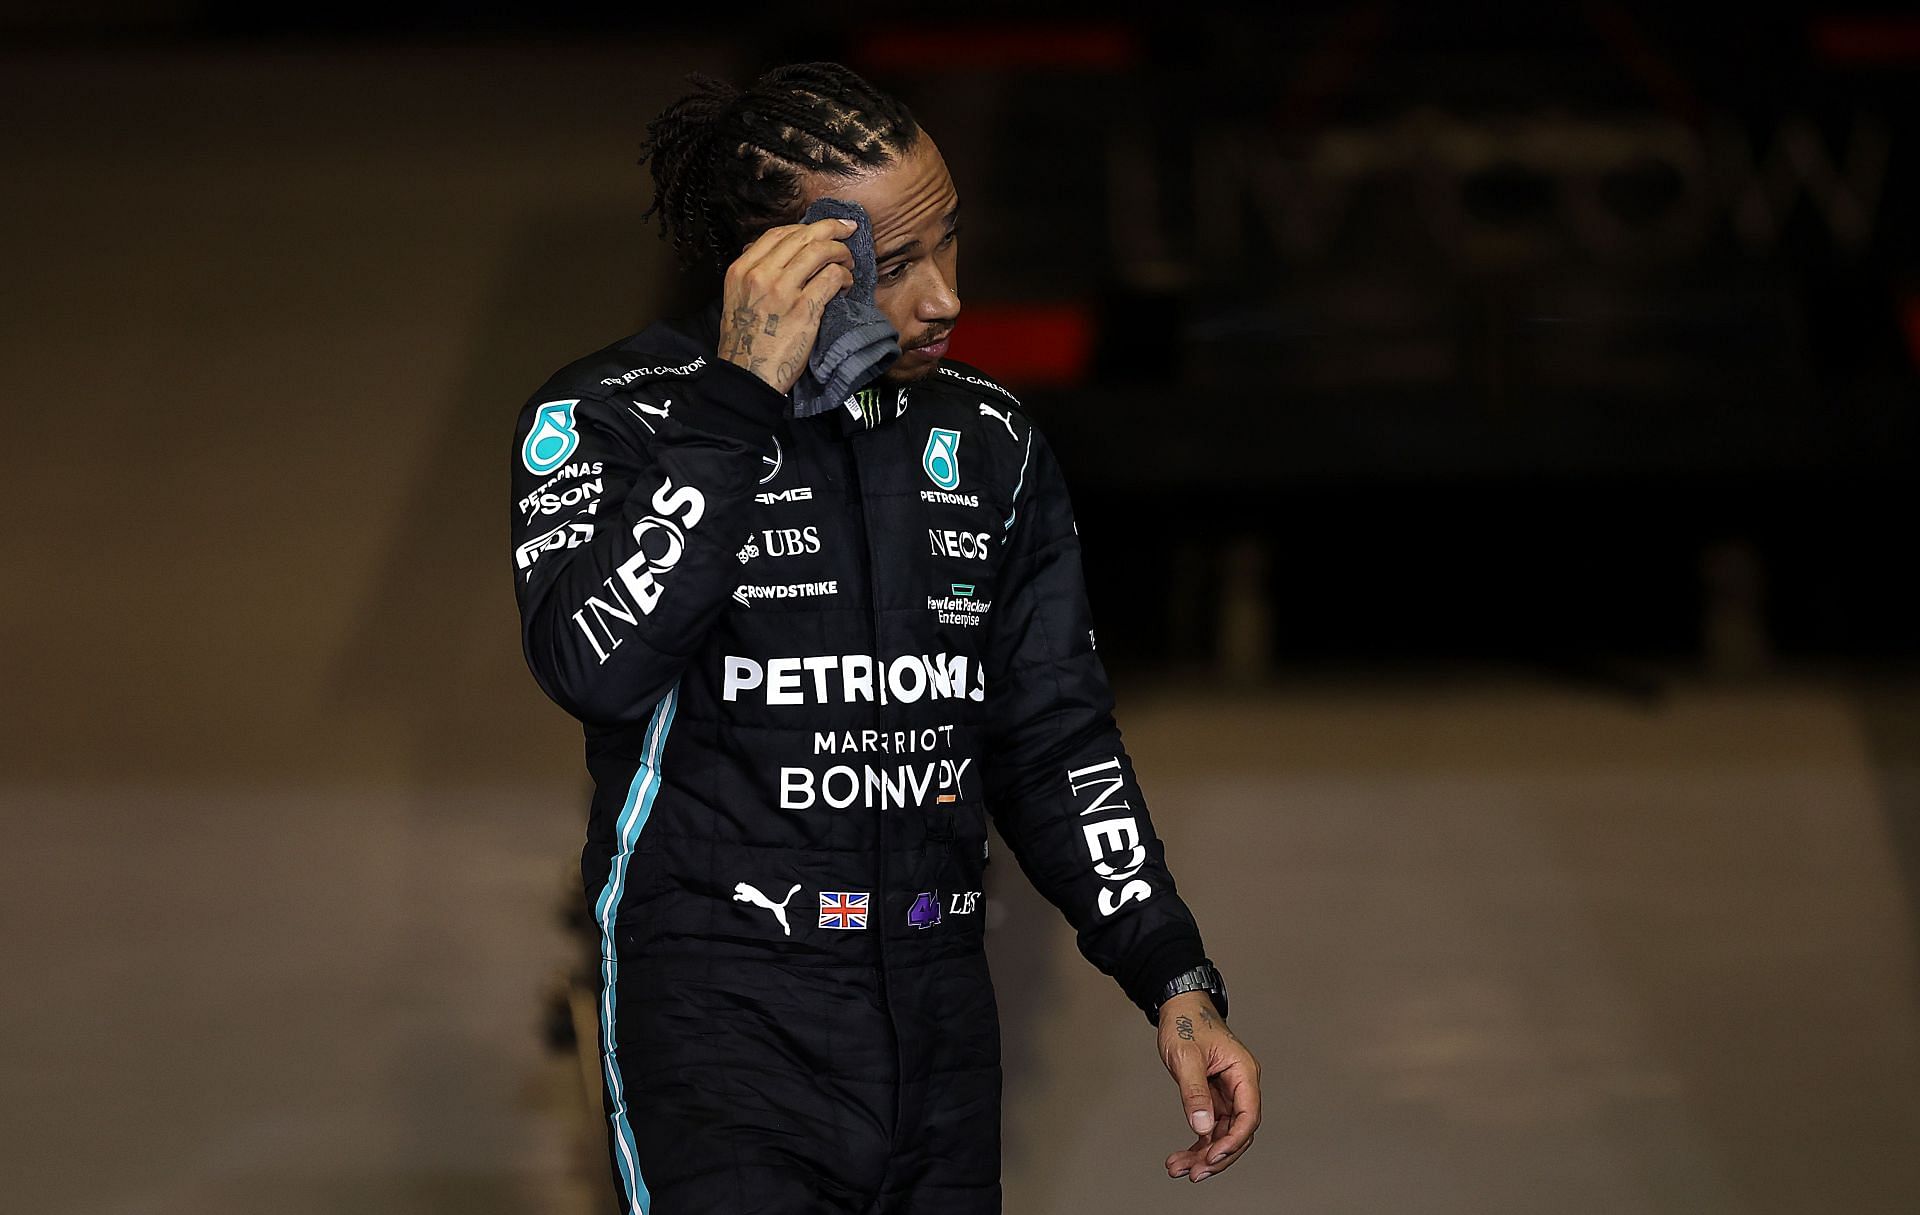 Lewis Hamilton after the 2021 Abu Dhabi Grand Prix (Photo by Lars Baron/Getty Images)